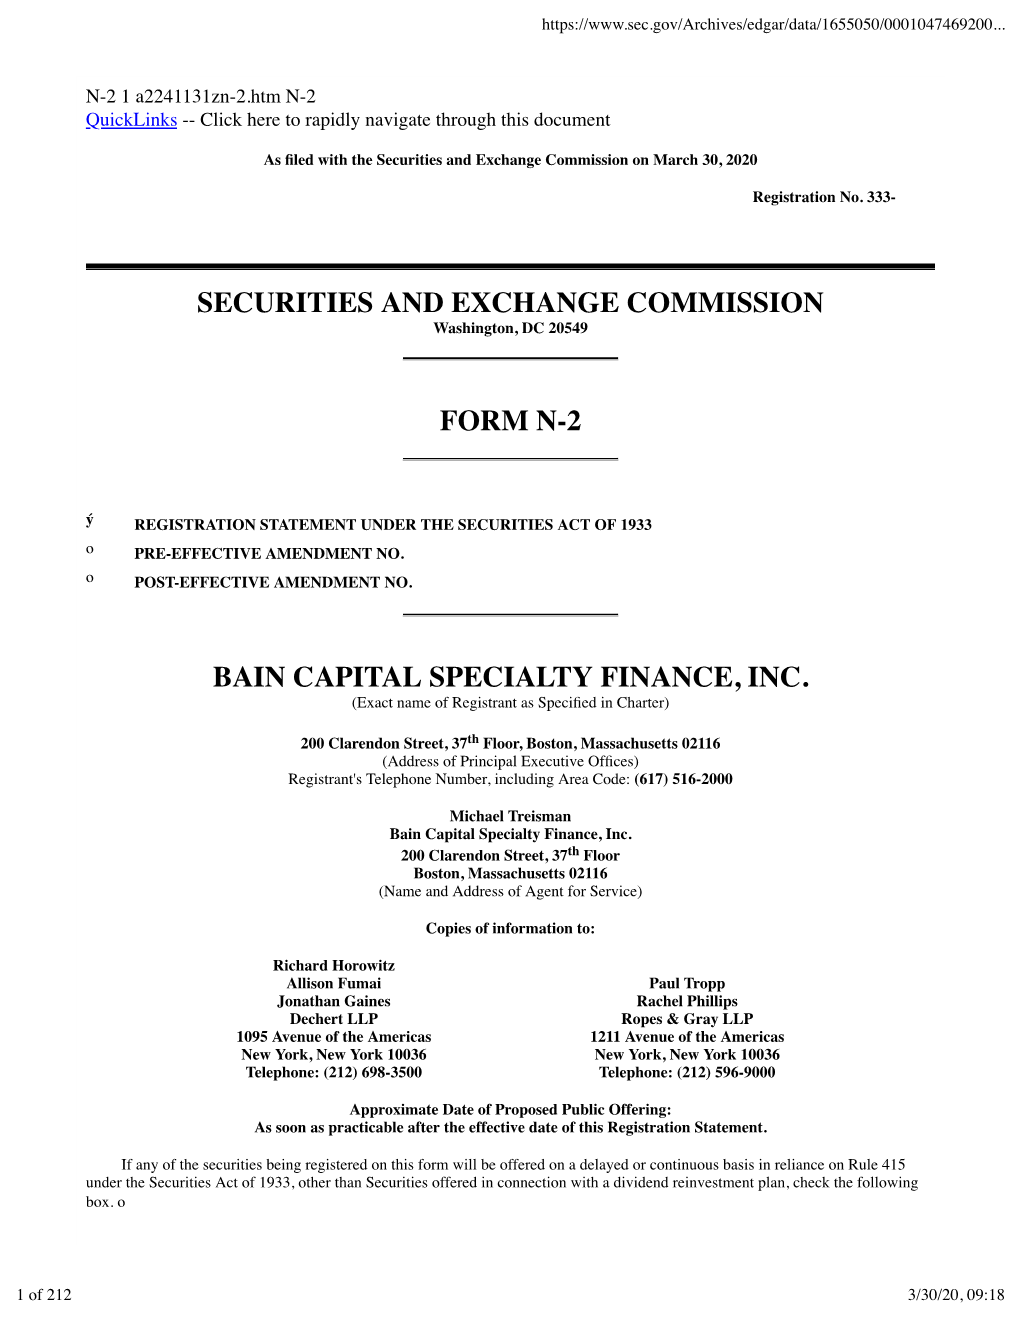 Securities and Exchange Commission Form N-2 Bain Capital Specialty Finance, Inc